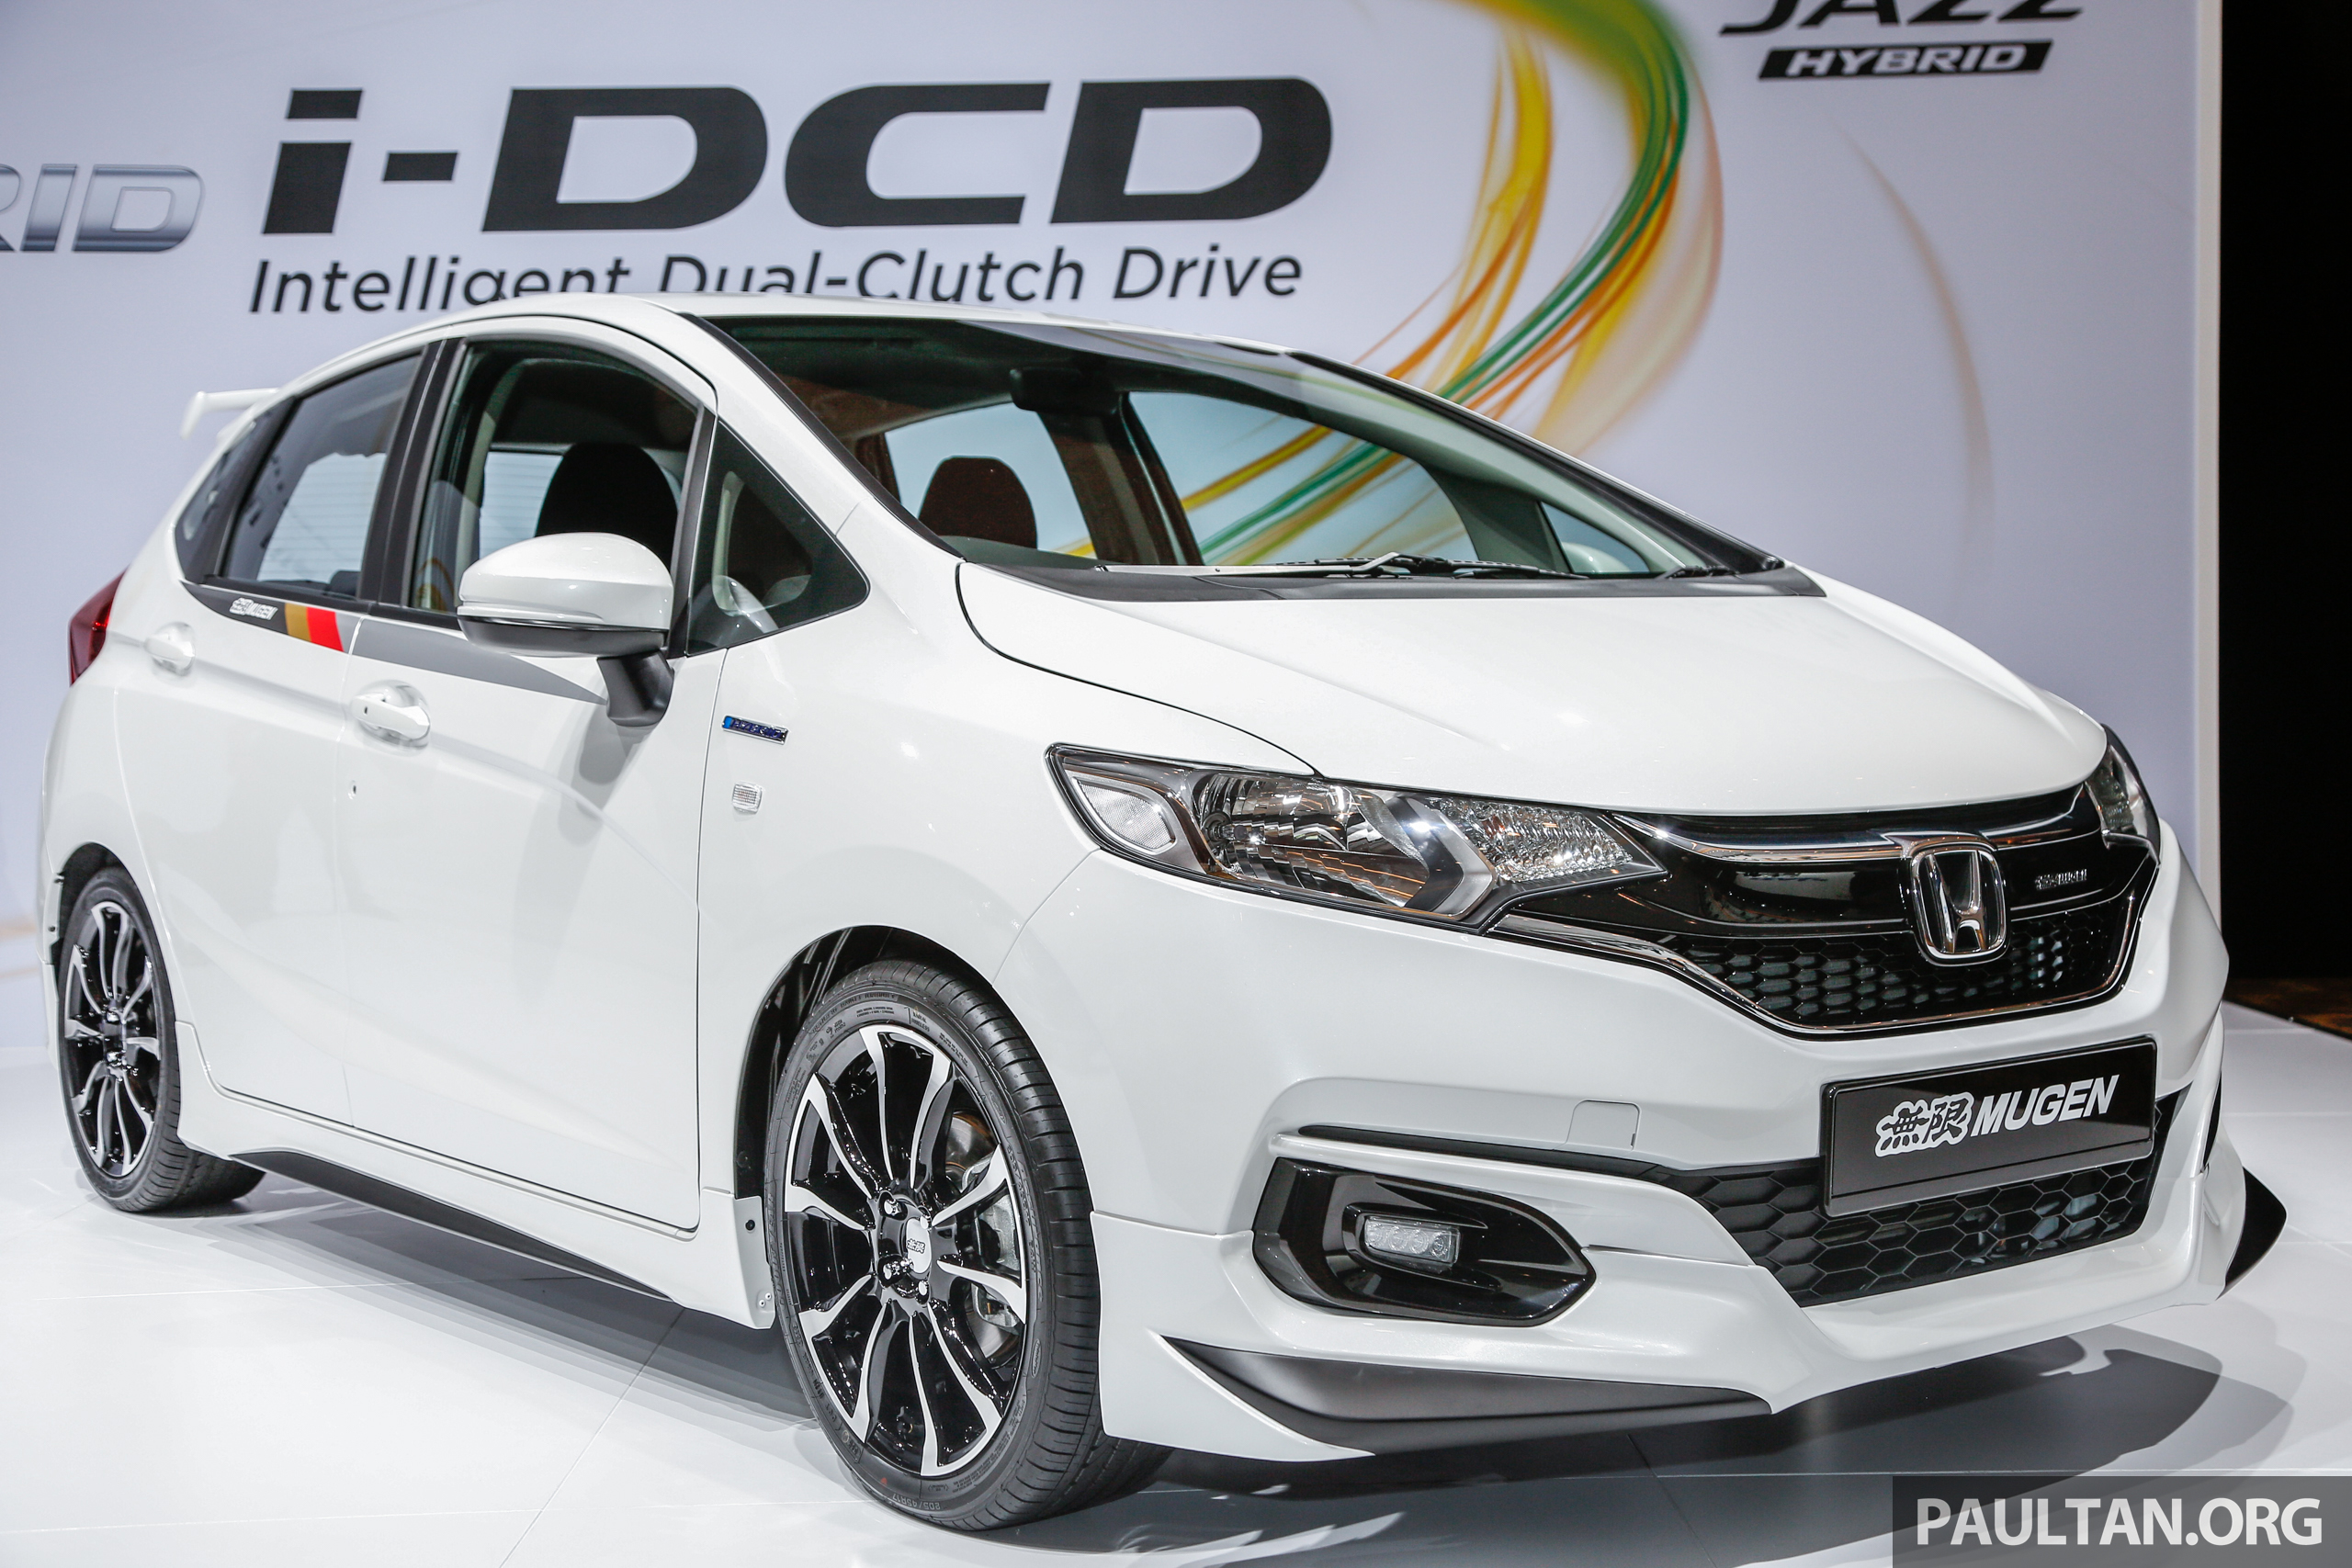 2017 Honda Jazz Facelift Mugen Prototype With Bodykit Accessories Makes Debut In Malaysia Paultan Org